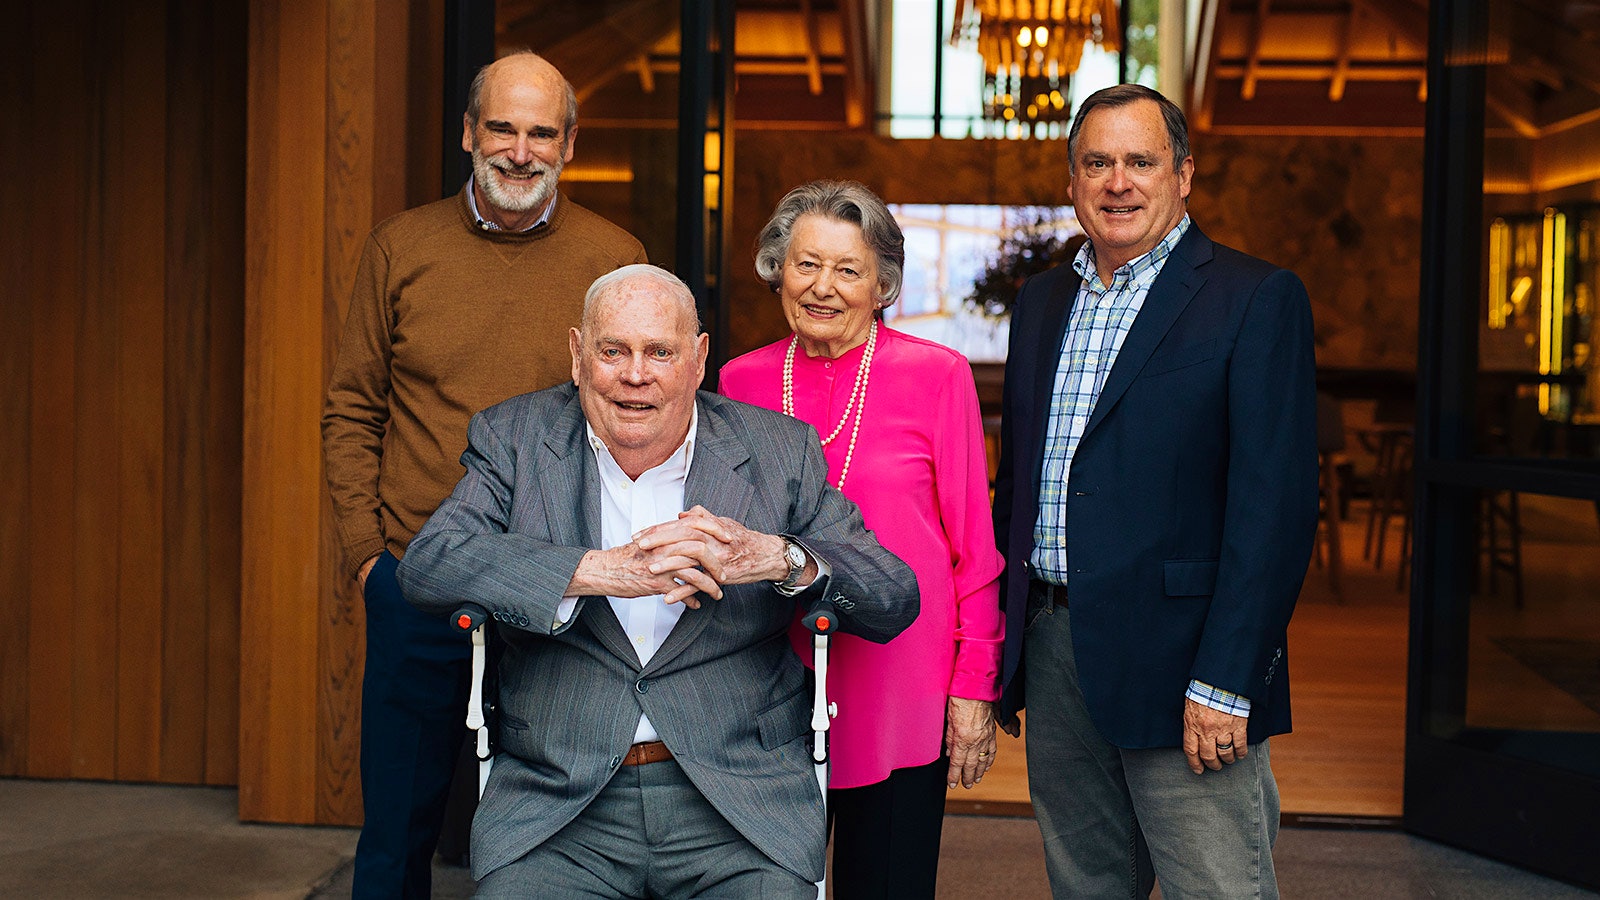  Jack Cakebread with his wife, Dolores, and sons Bruce, left, and Dennis, who help manage the winery today, at a 2019 winery event.